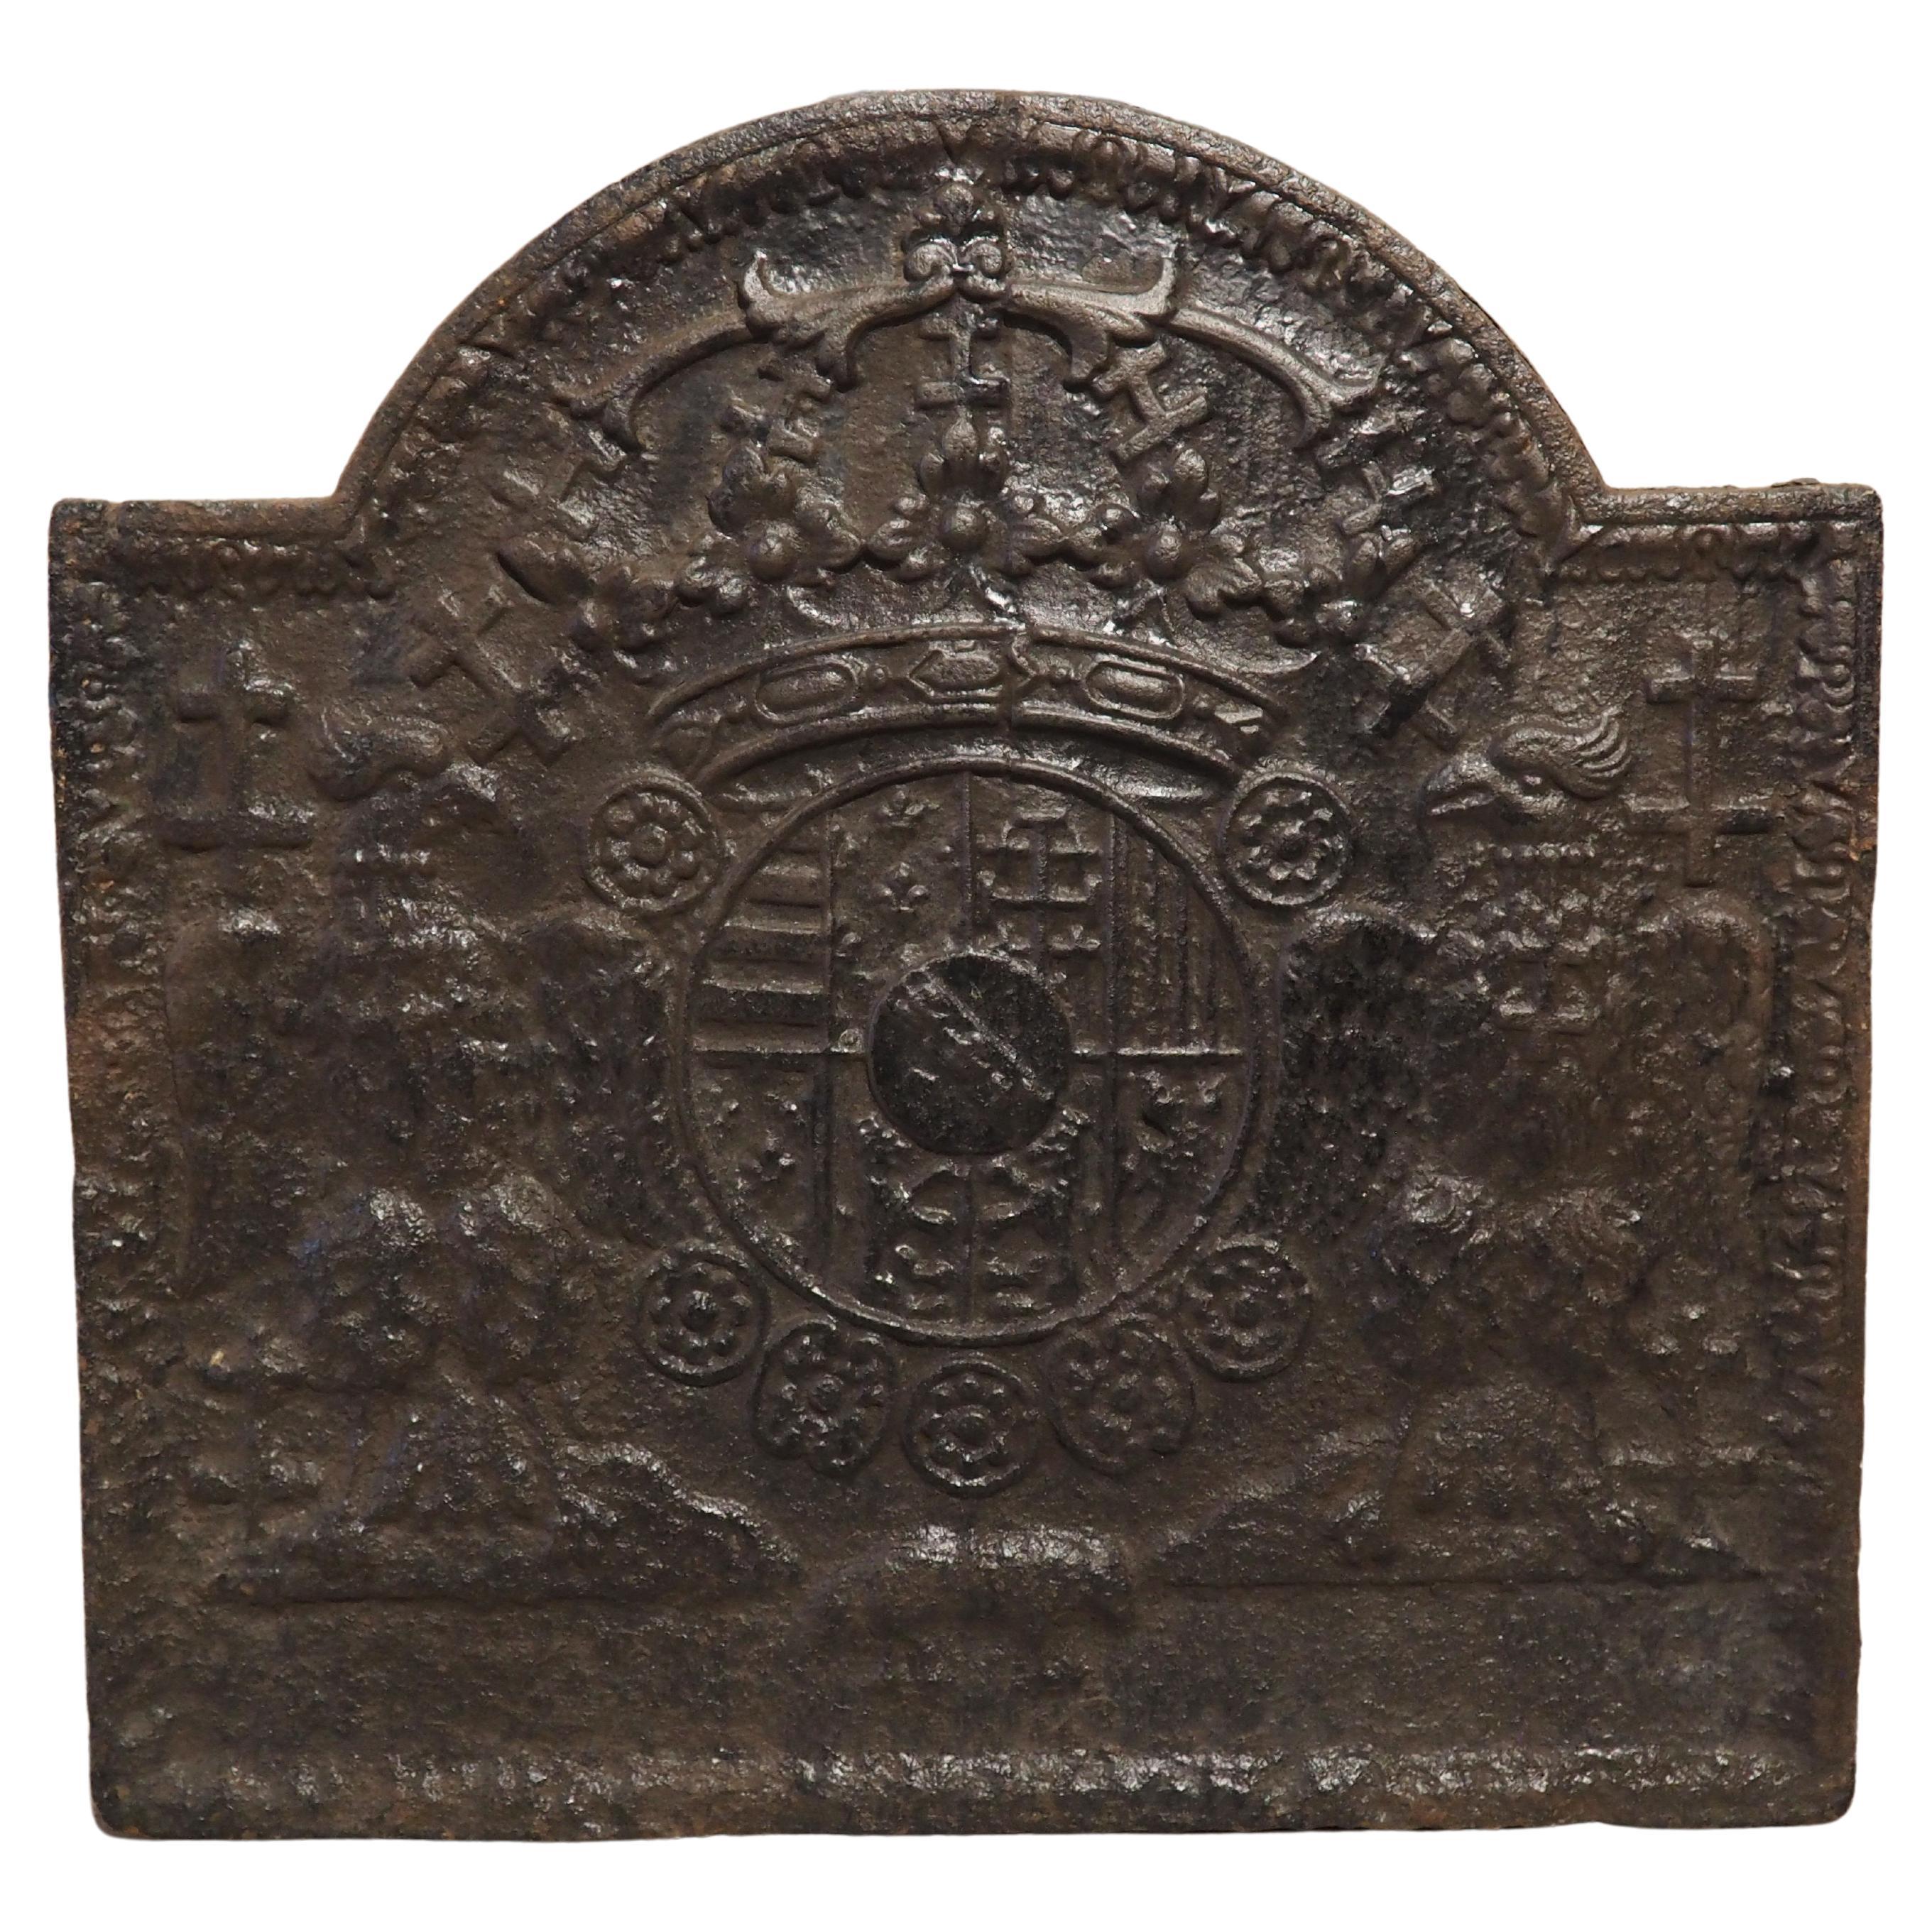 Early 1800s Heraldic Cast Iron Fireback from France